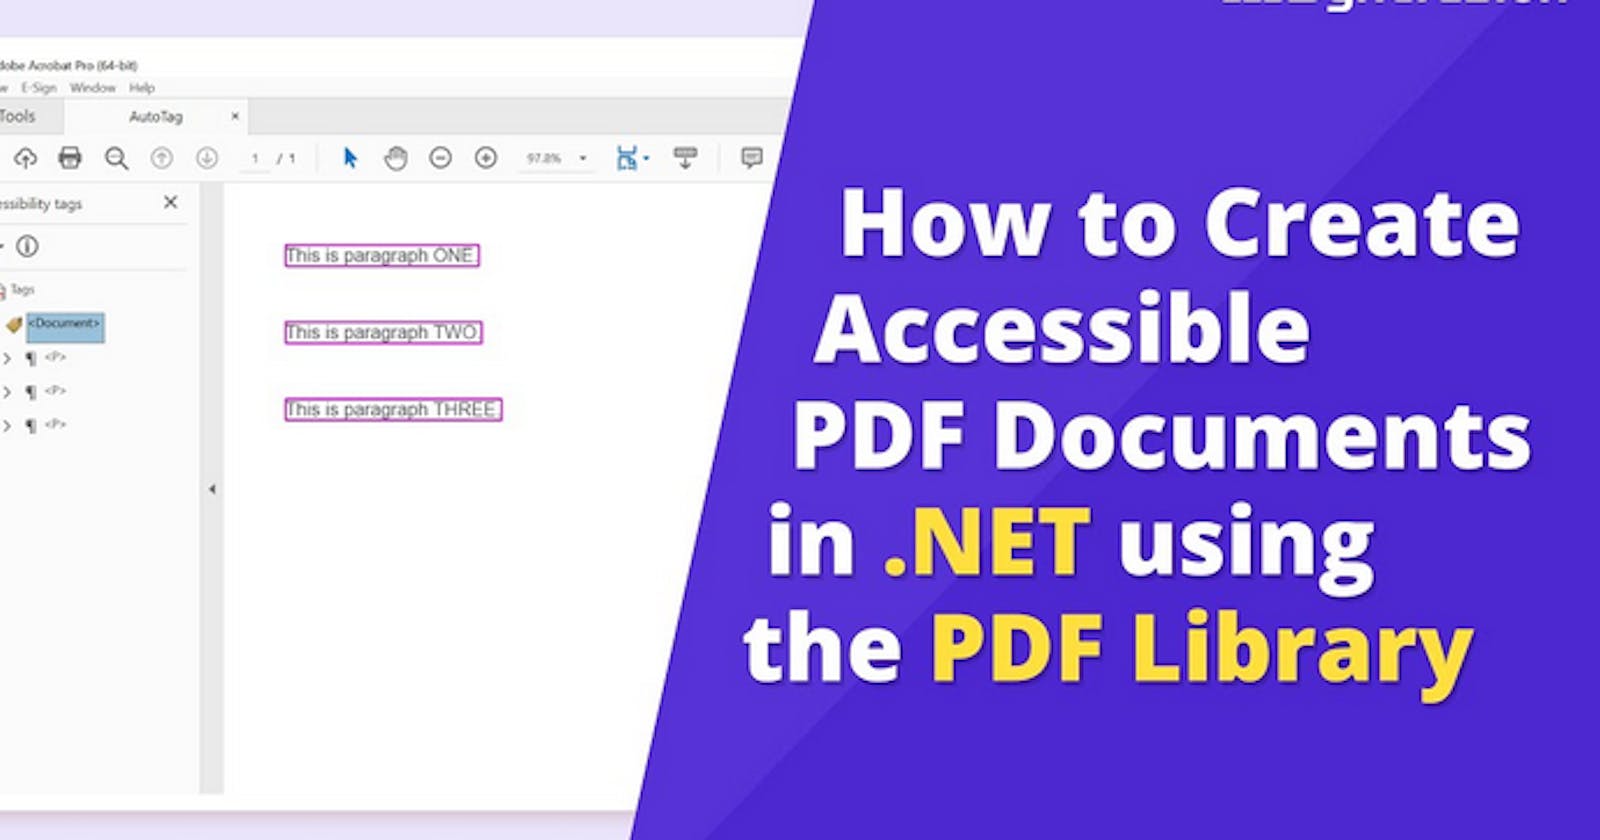 How to Create Accessible PDF Documents in .NET using the PDF Library